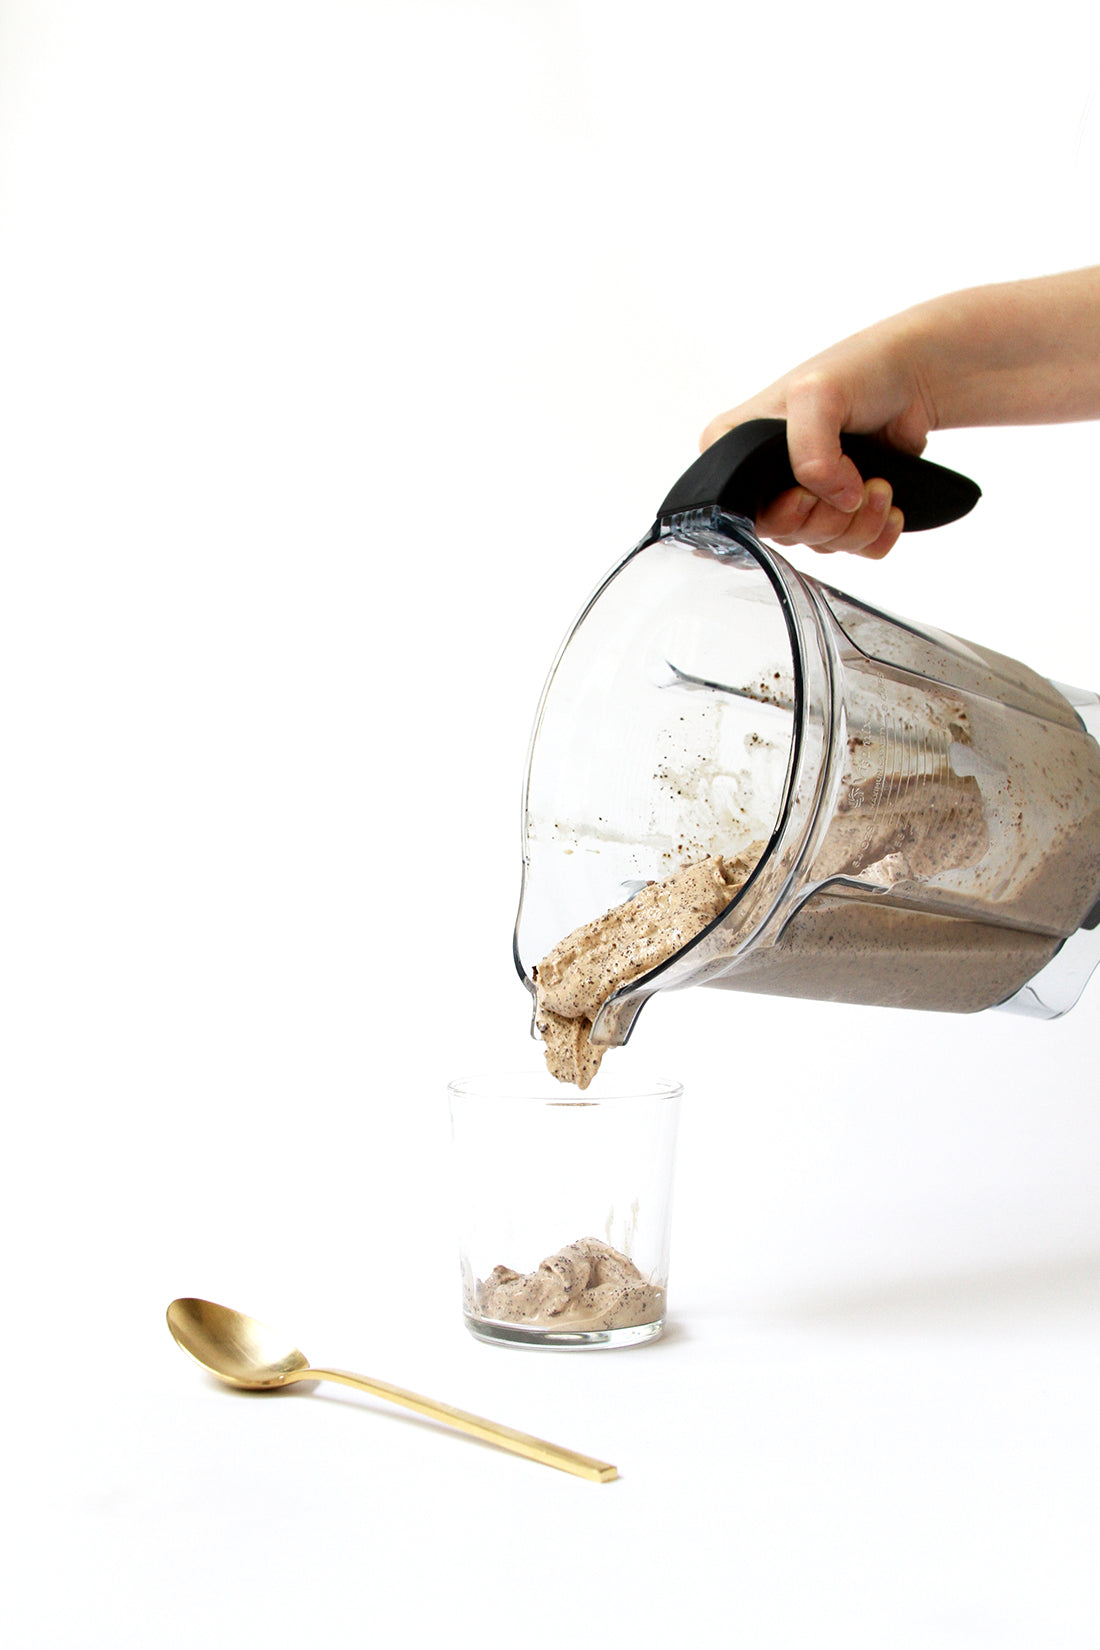 Image of a hand pouring Miss Jones Baking Co Coffee Break Shake into a cup from a blender next to a gold spoon